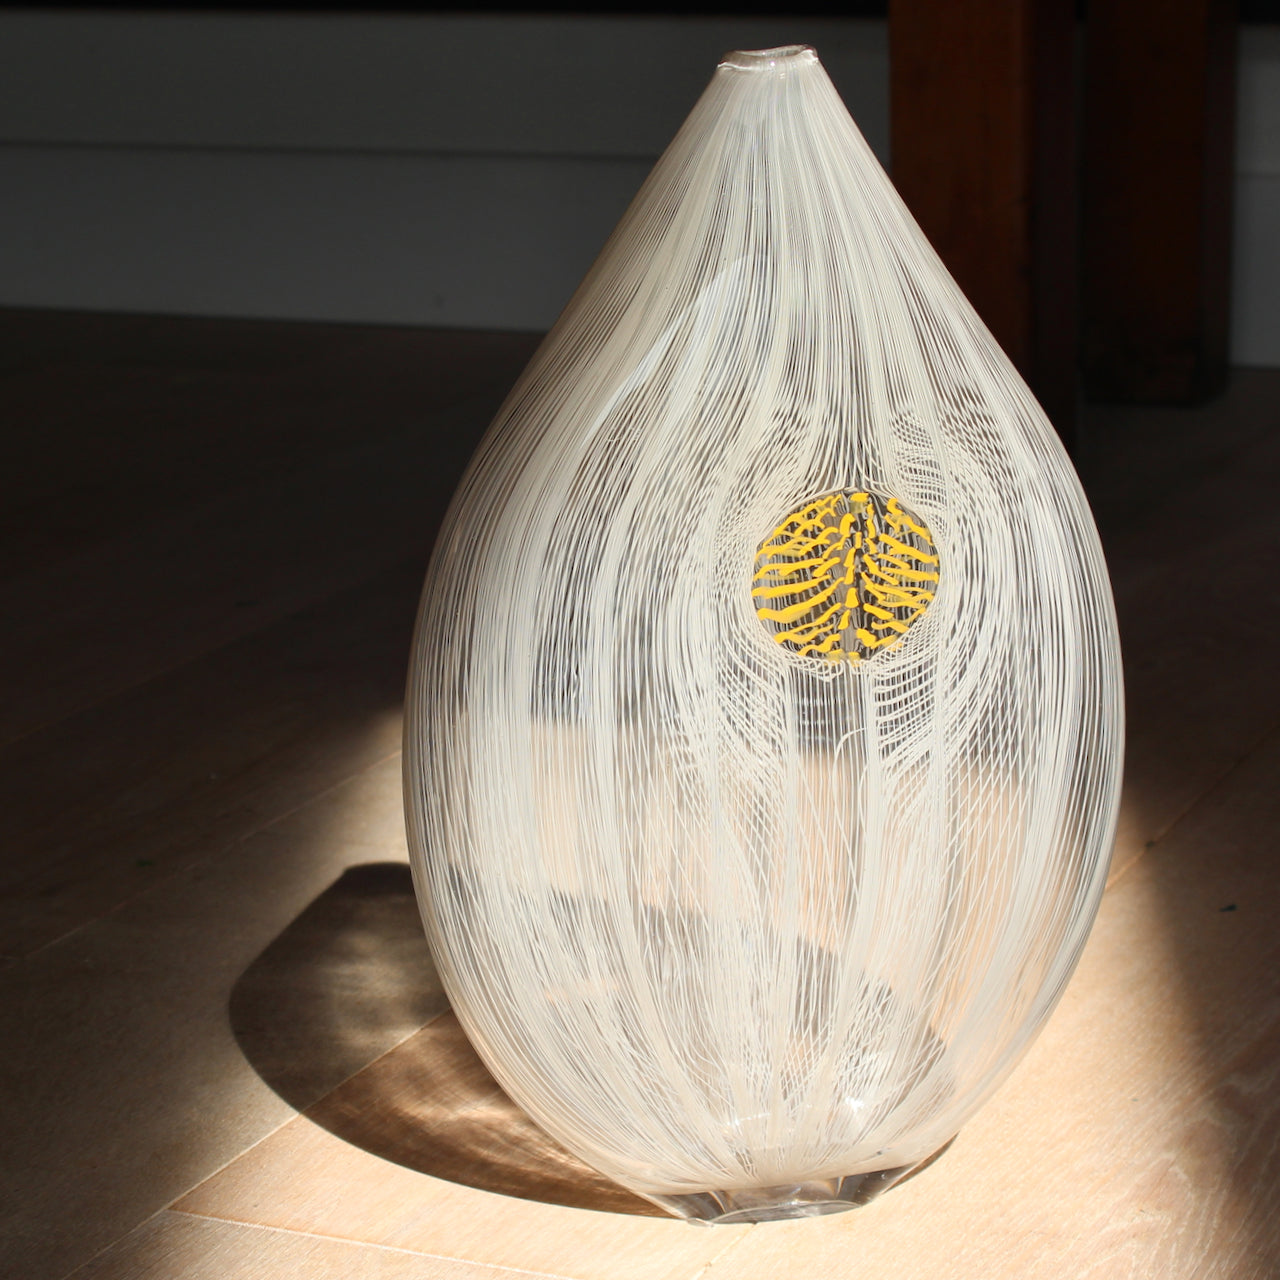 Benjamin Lintell tear shaped glass vase in  white and clear with central yellow detail 